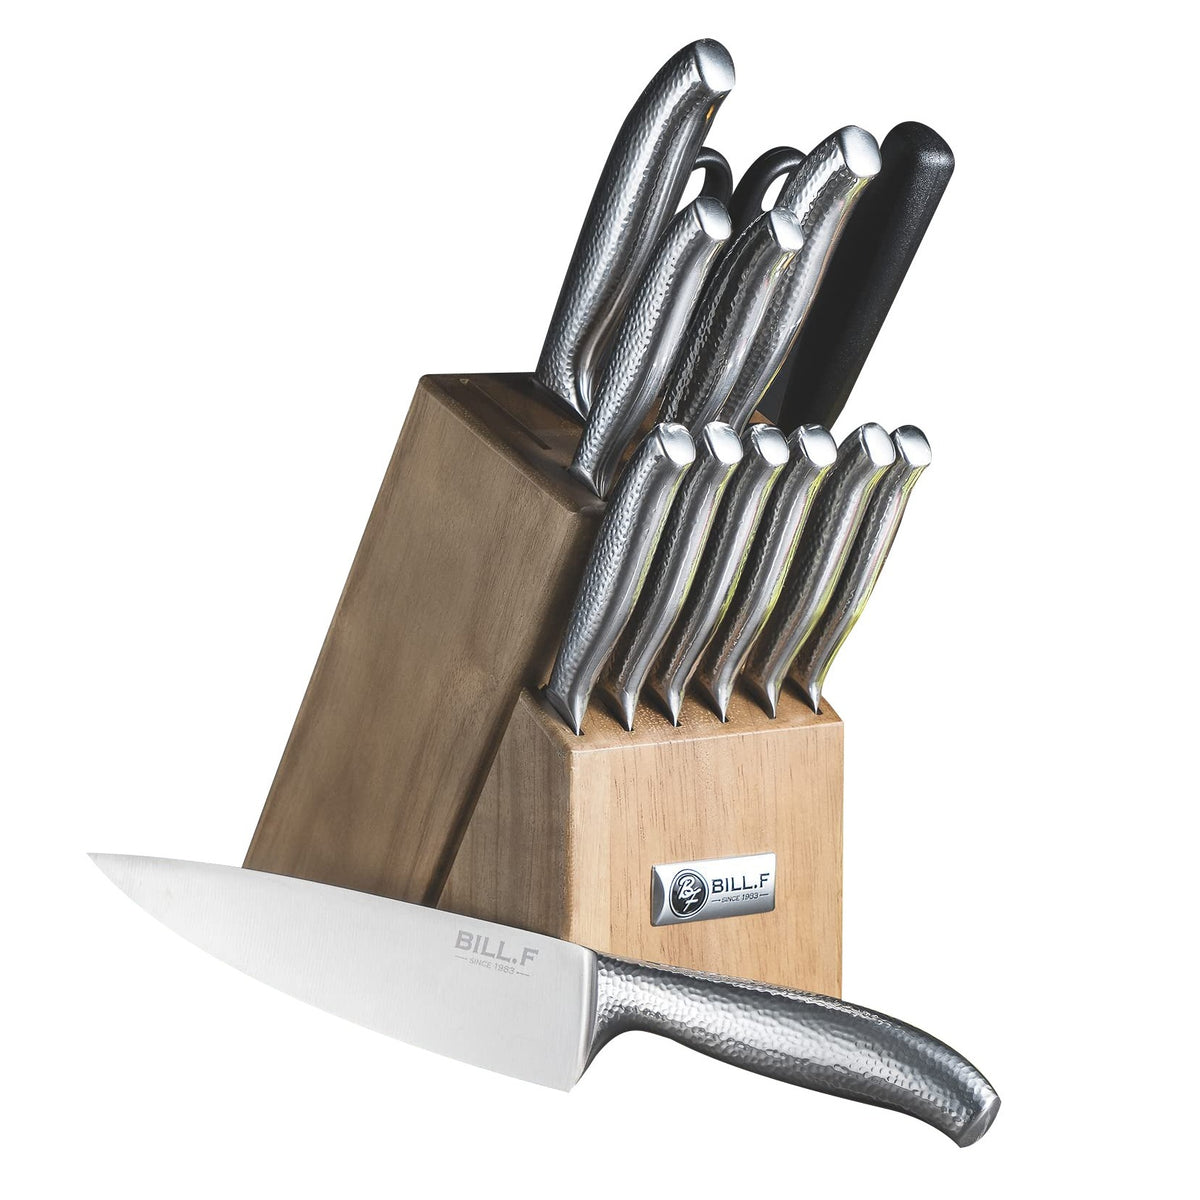 Bill.F® 6 Pieces Wooden Knife Block Set With Tablet/Cookbook Stand